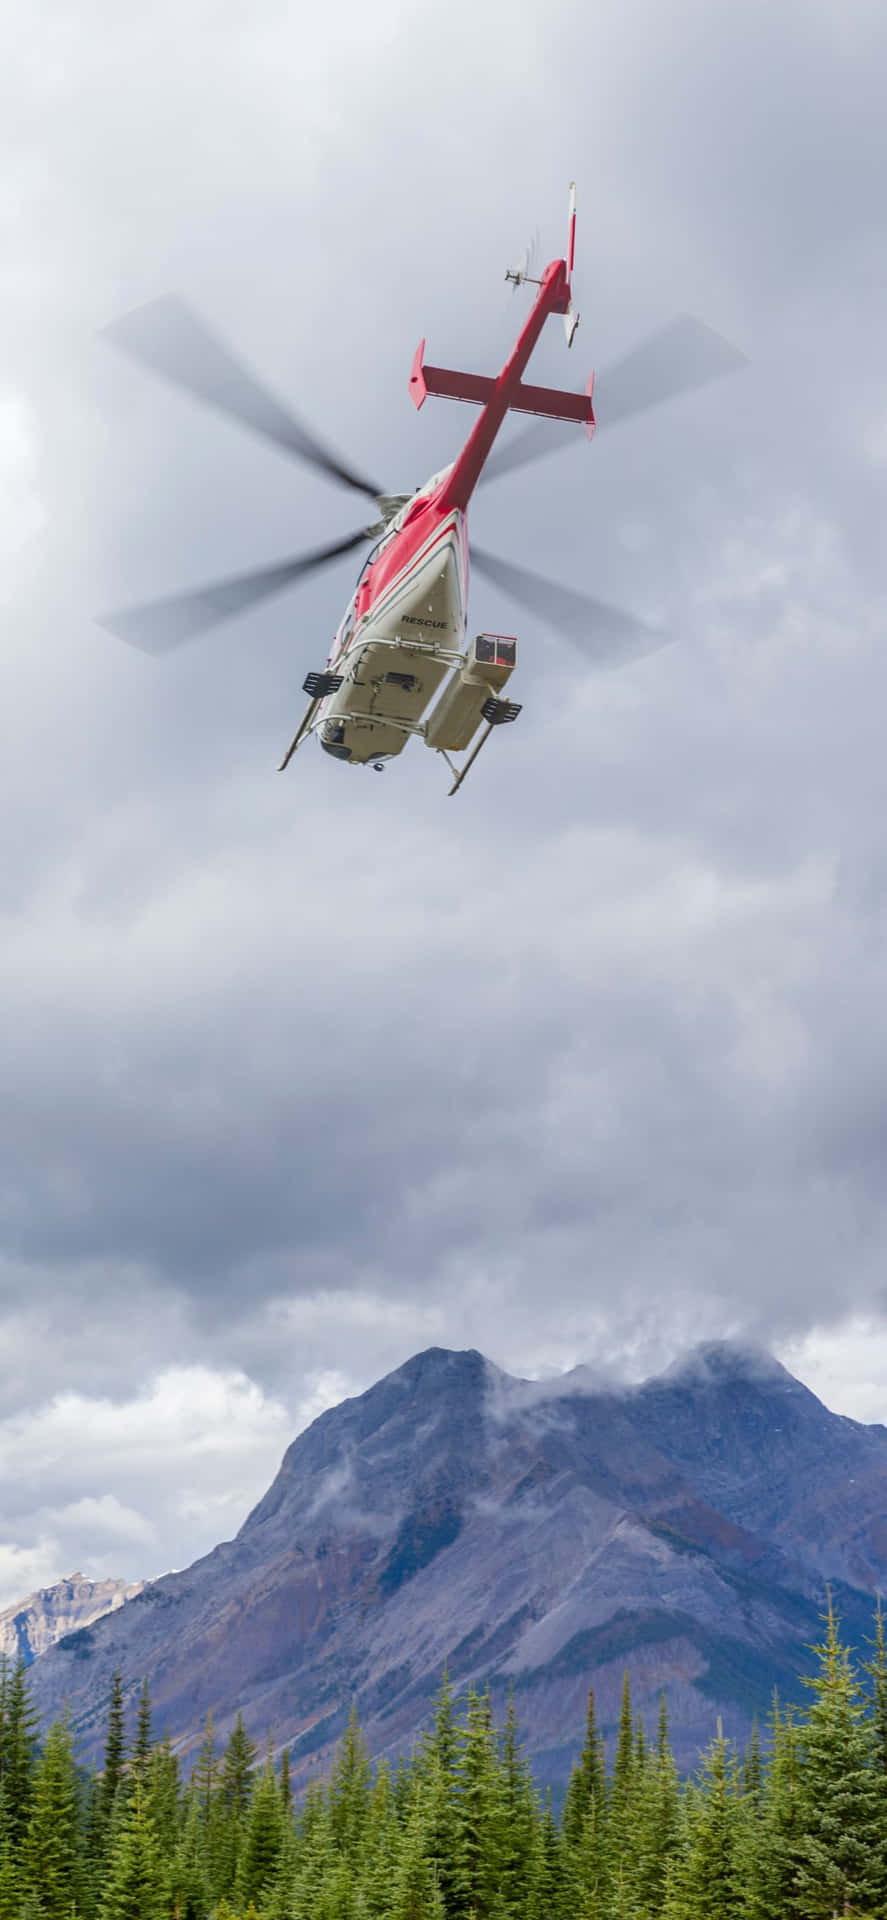 A Helicopter Flying Over A Forest With Mountains In The Background